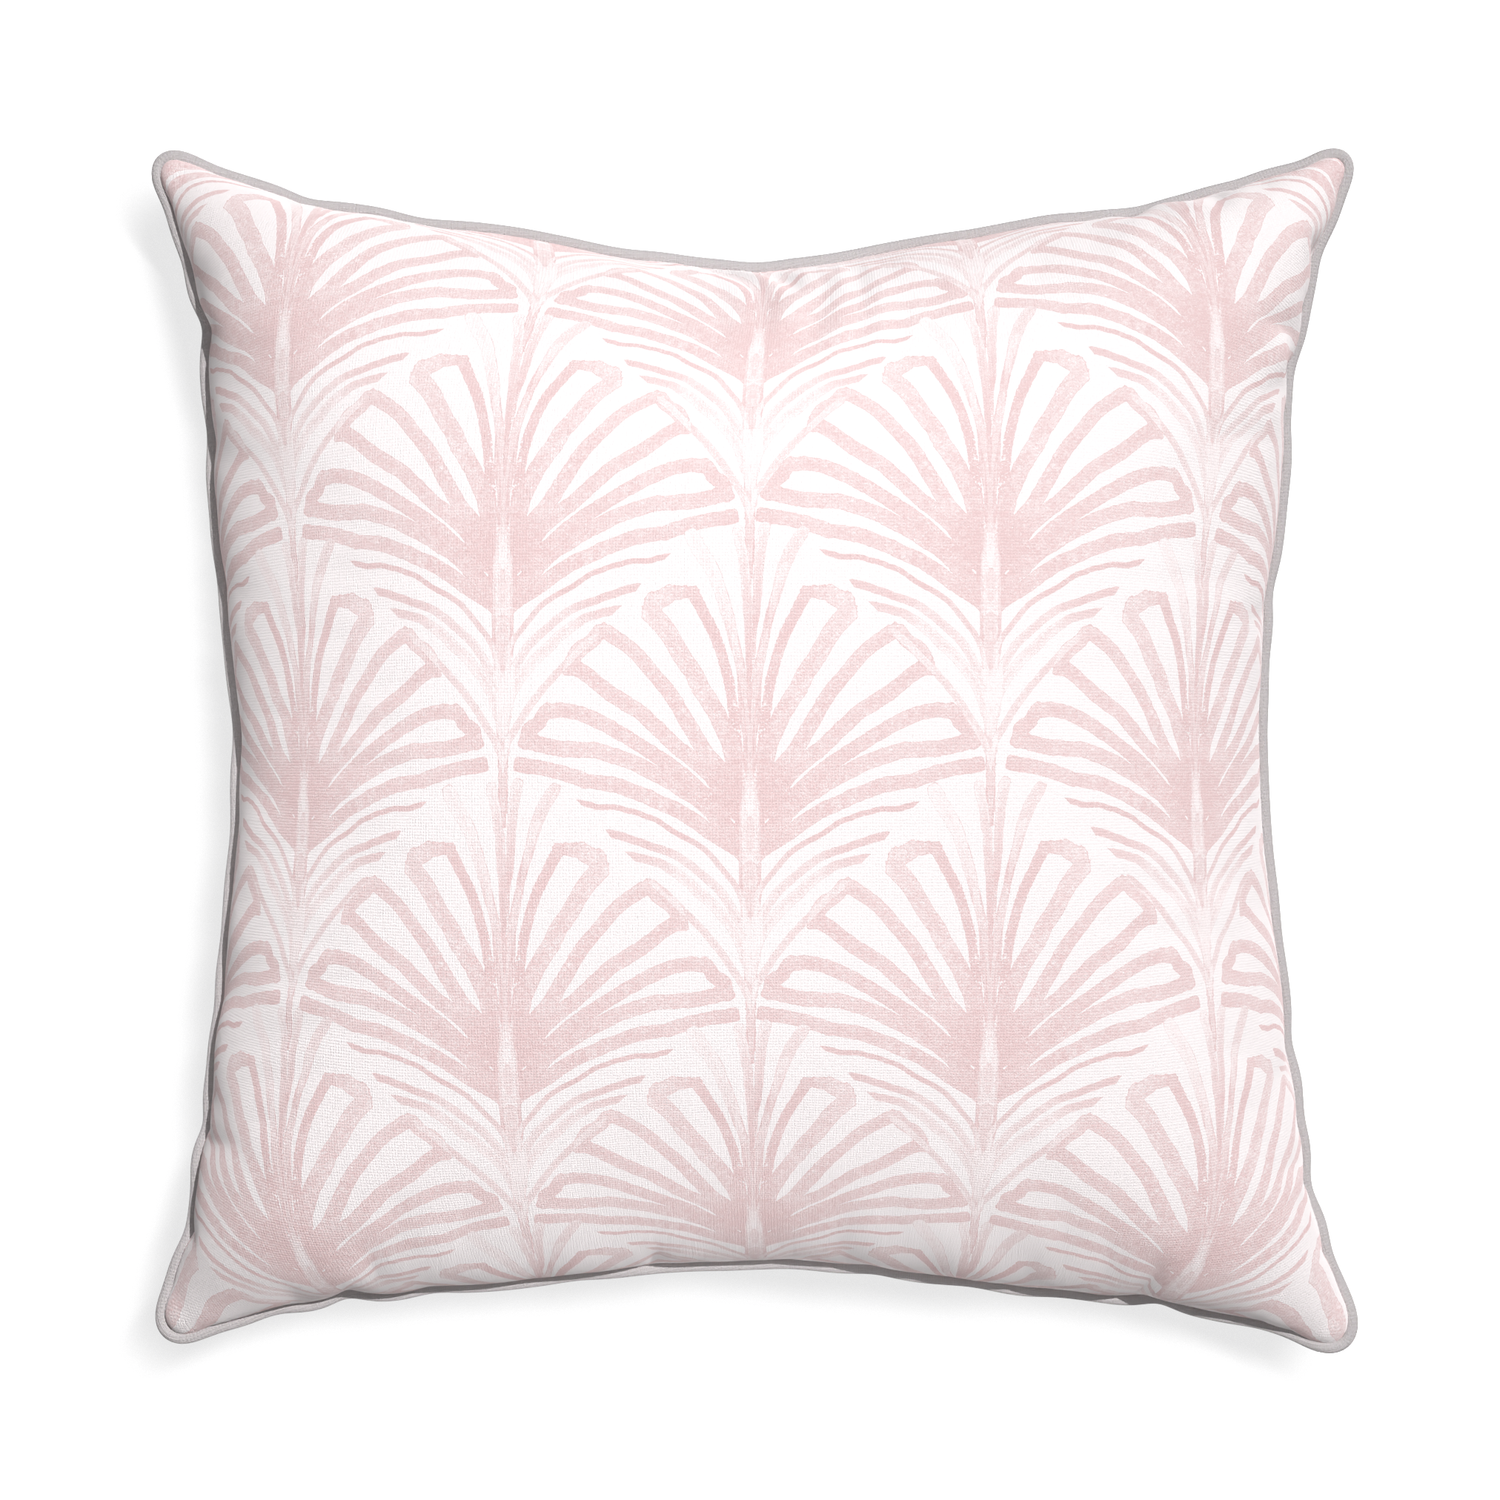 Euro-sham suzy rose custom pillow with pebble piping on white background